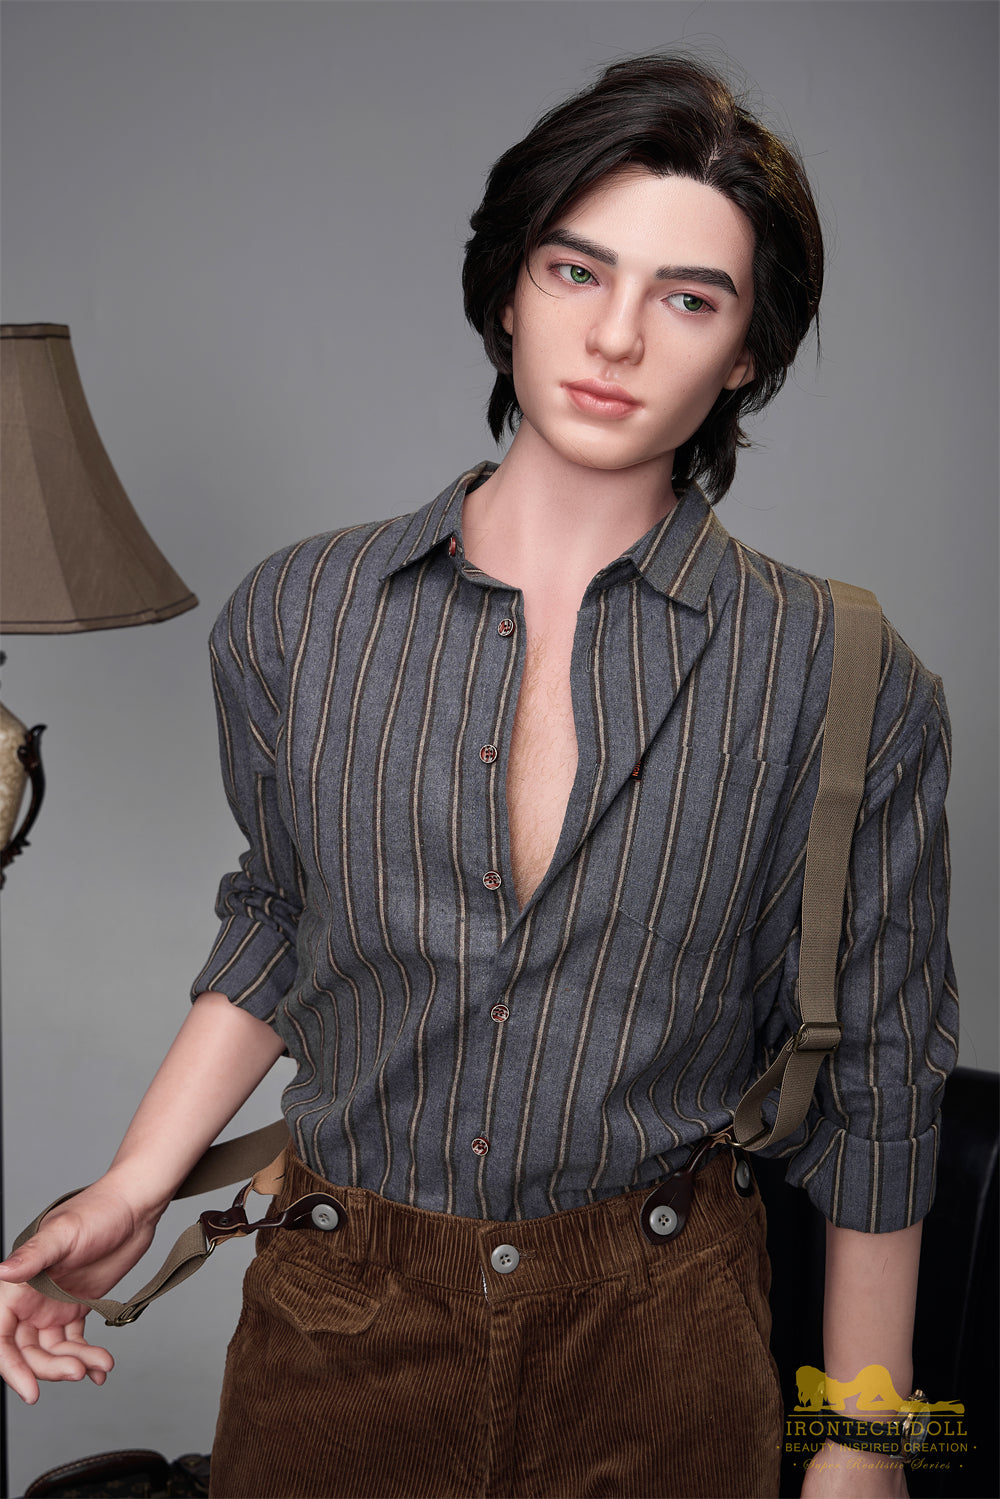 Irontechdoll Lucas 5ft58 / 170cm M9 Head Full Silicone Realistic Young Man Sex Doll